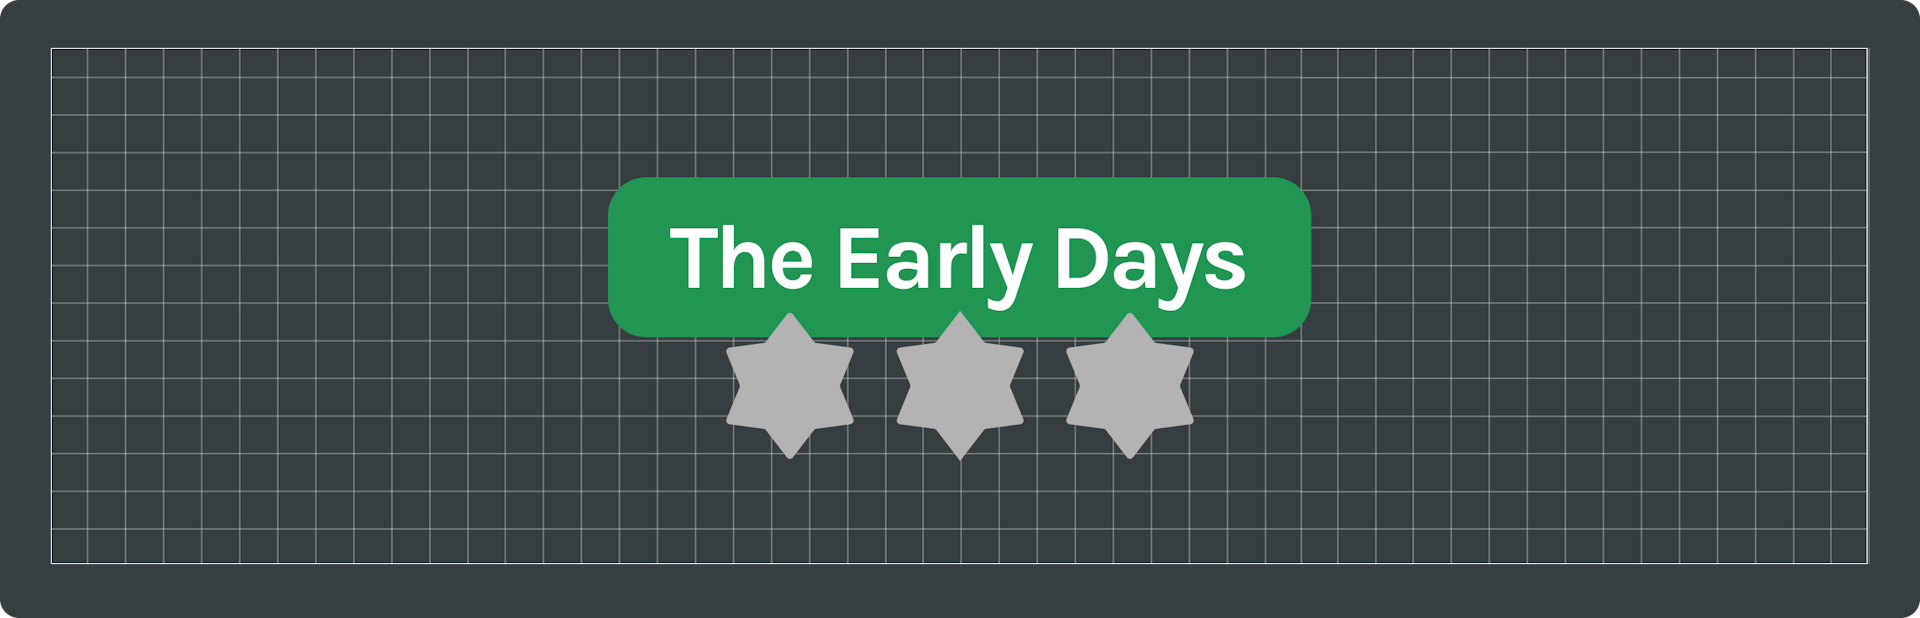 text saying "the early days" with three grey stars